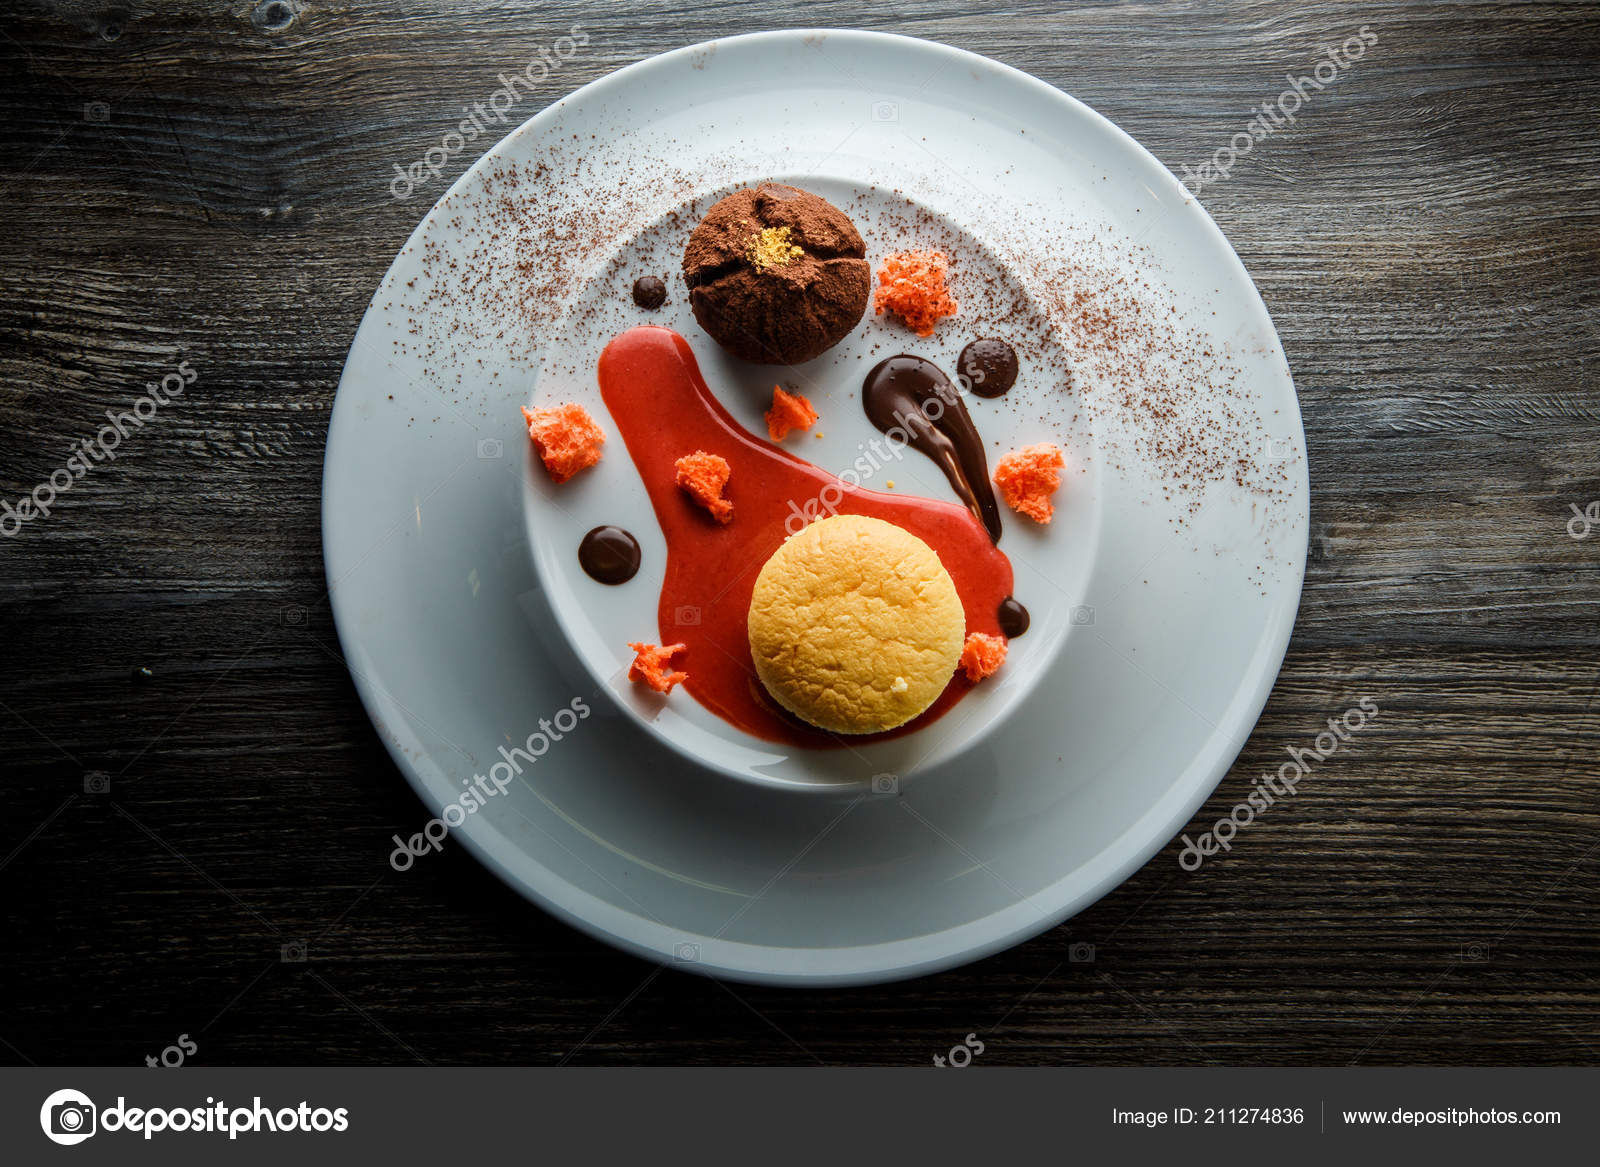 Top View Delicious Dessert Small Cake Chocolate Truffle Red